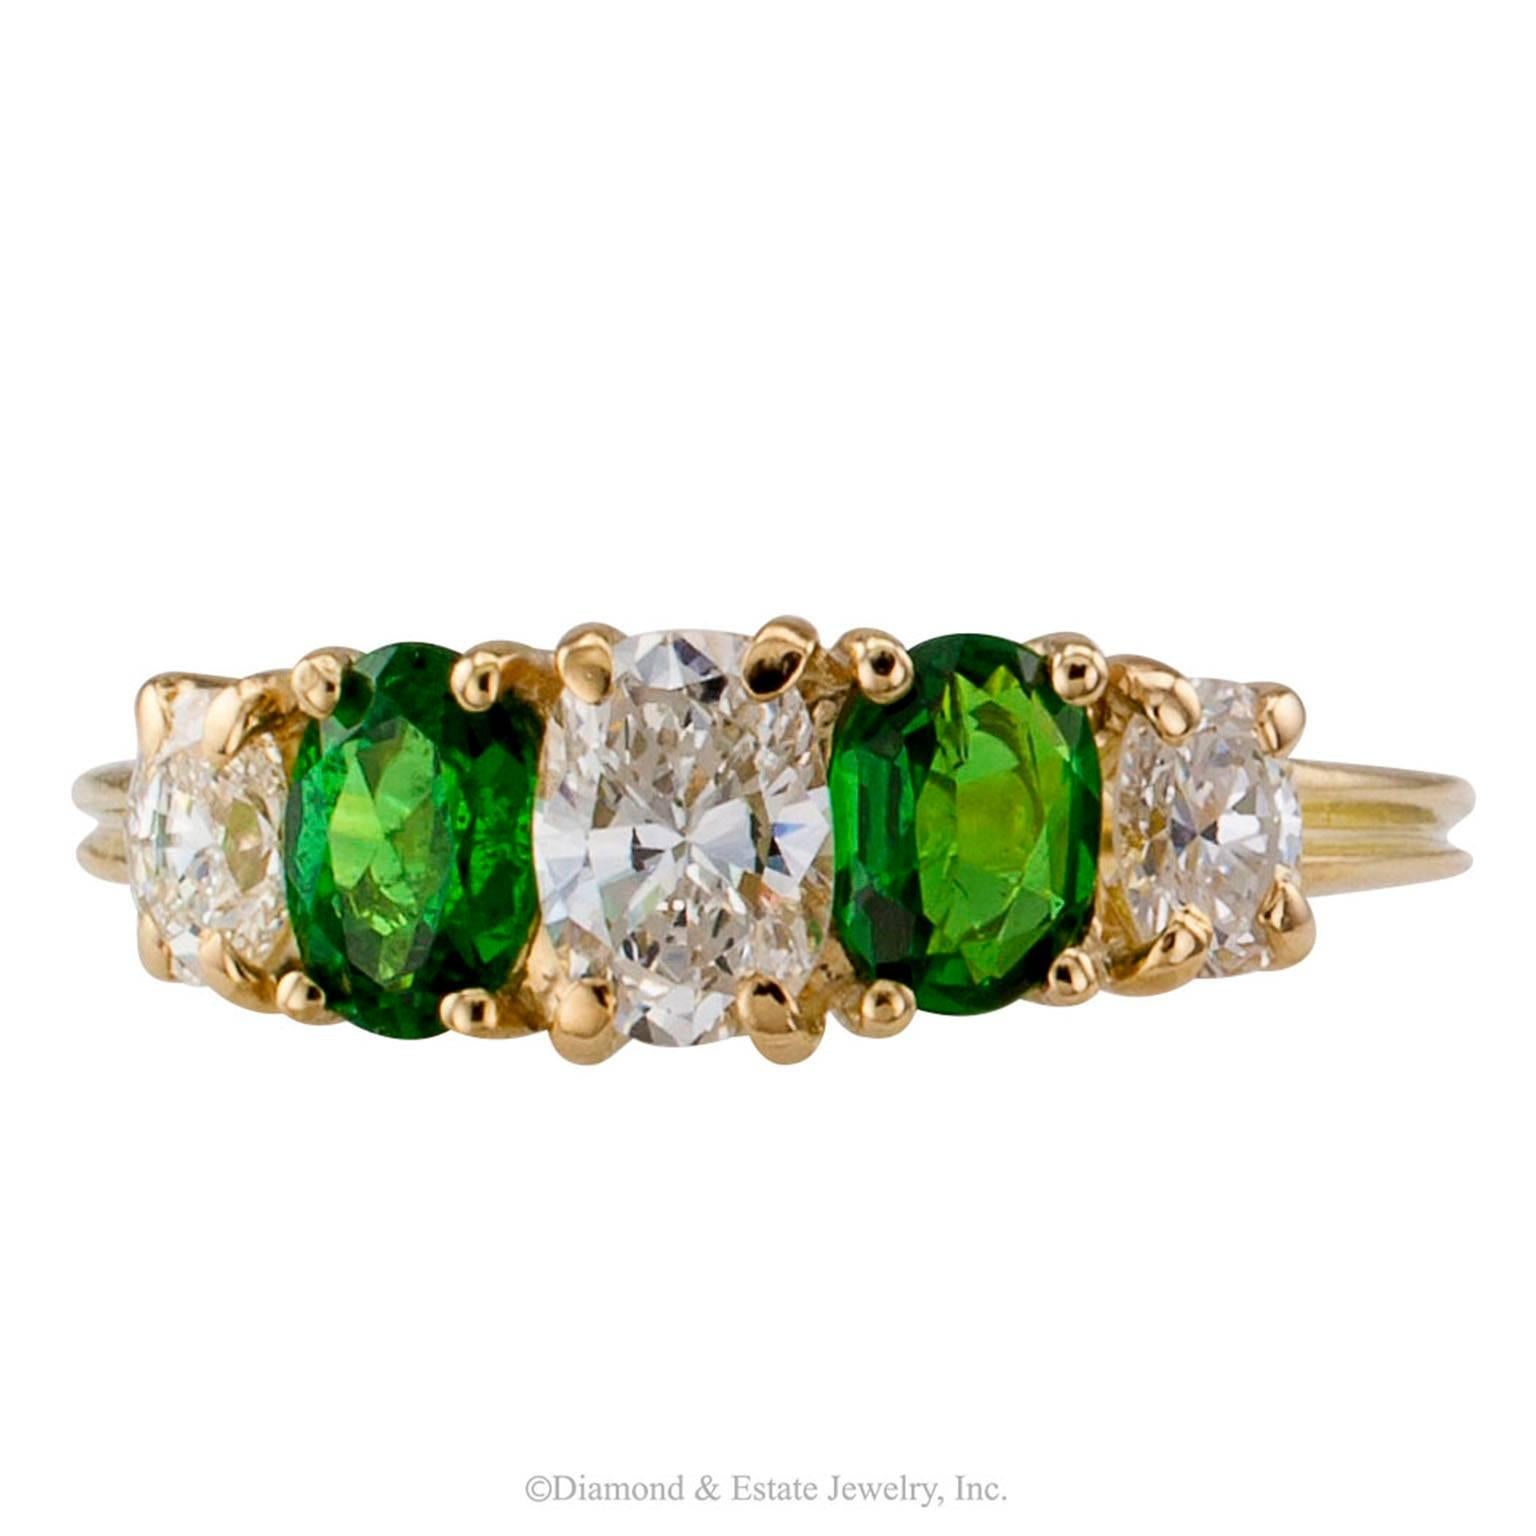 Tsavorite Garnet Diamond Gold Five-stone Ring

Tsavorite garnet and diamond five-stone gold ring circa 1980.  The design features a pair of beautiful and bright oval tsavorite garnets weighing approximately 0.67 carat, spaced between three similarly